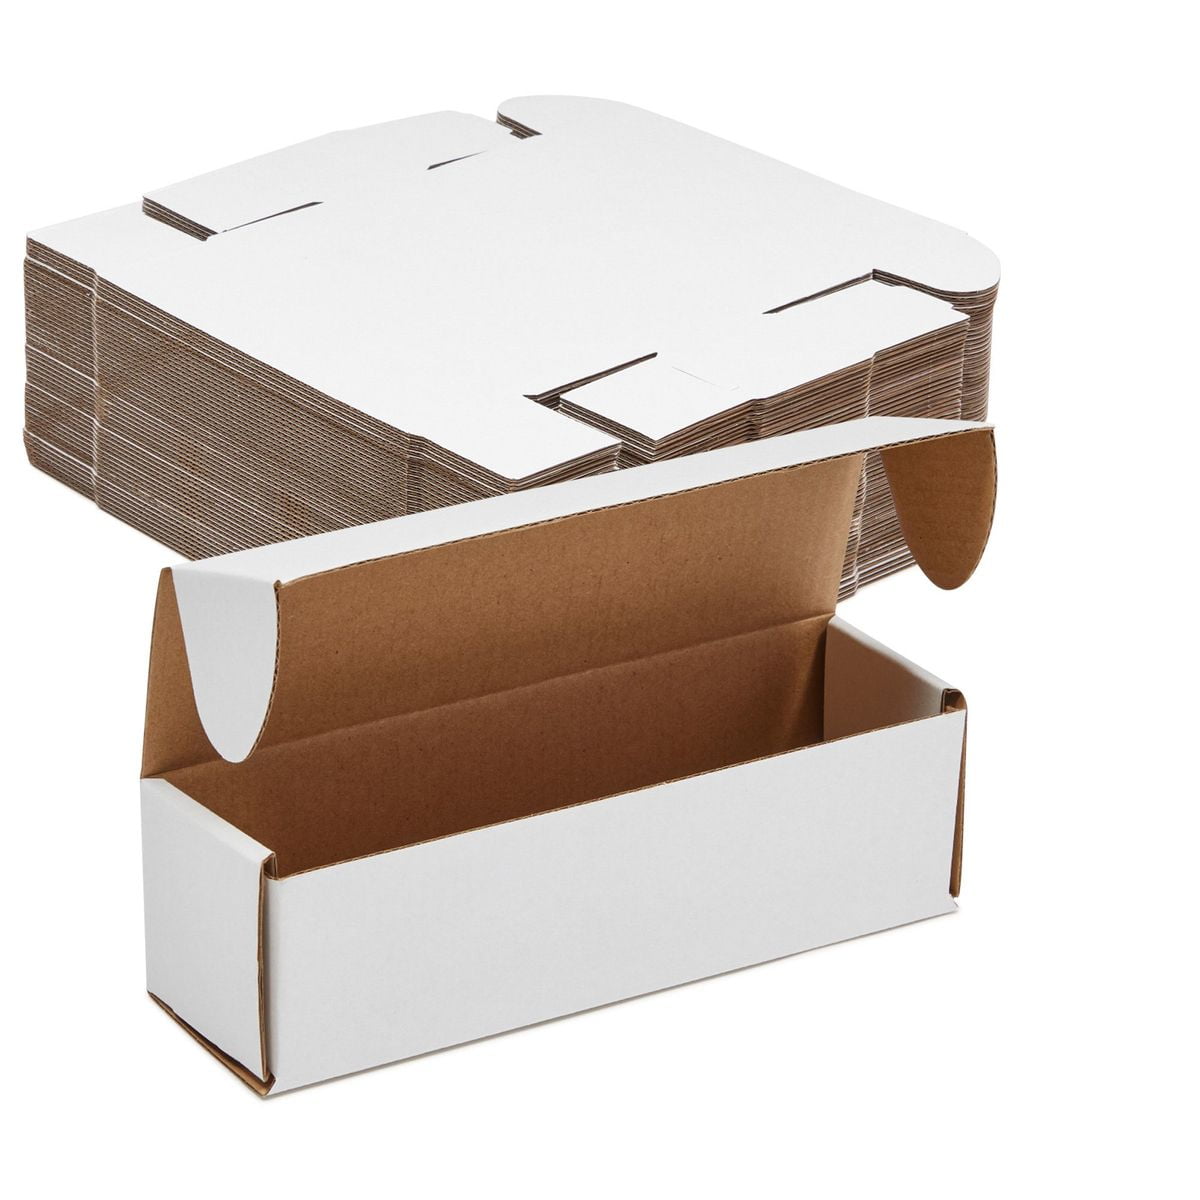 100 4x4x48 TALL Cardboard Shipping Boxes Corrugated Cartons 